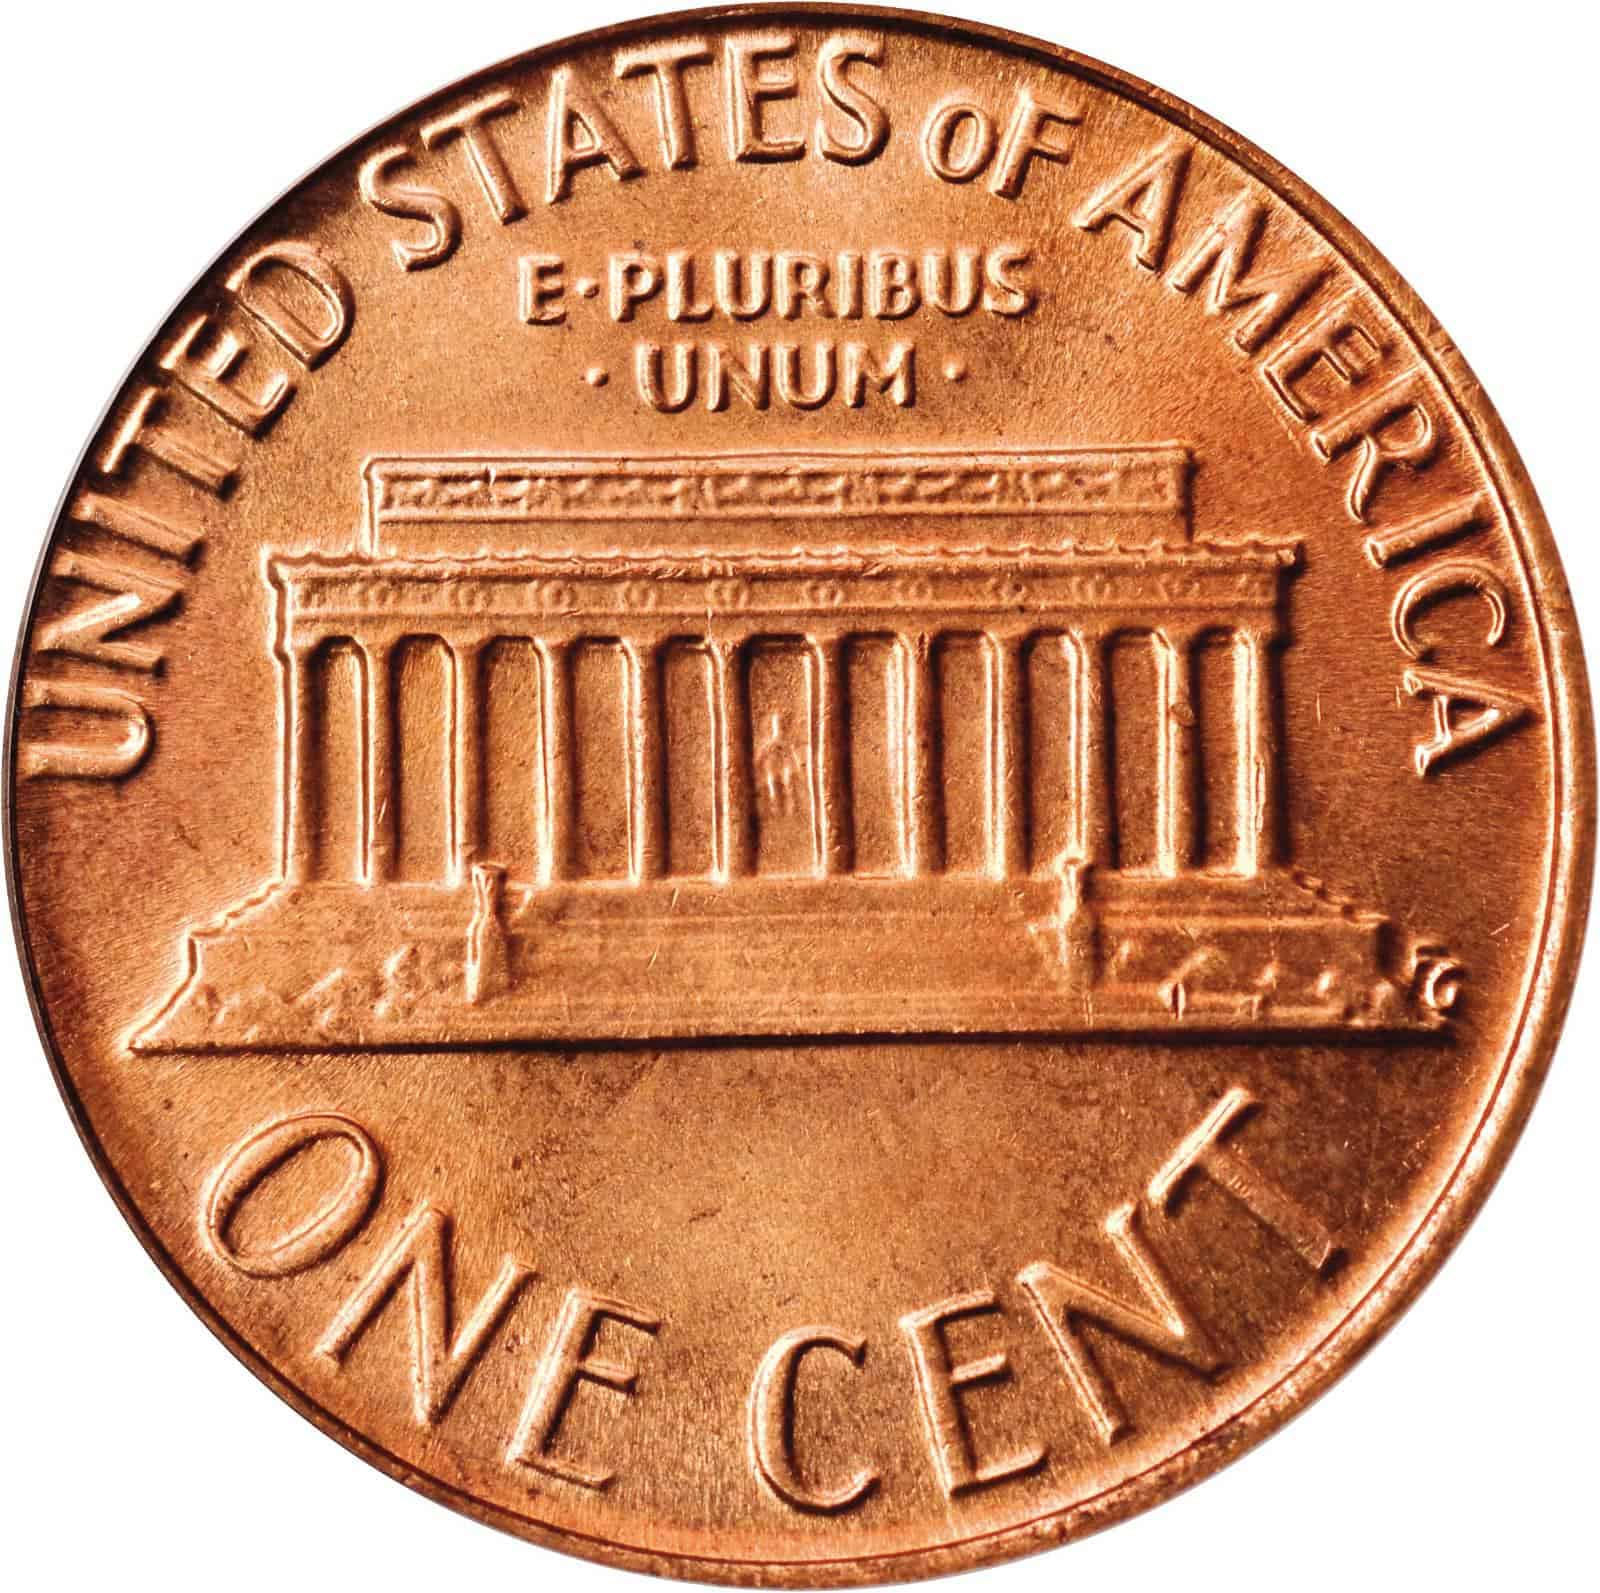 The Reverse of the 1976 Penny